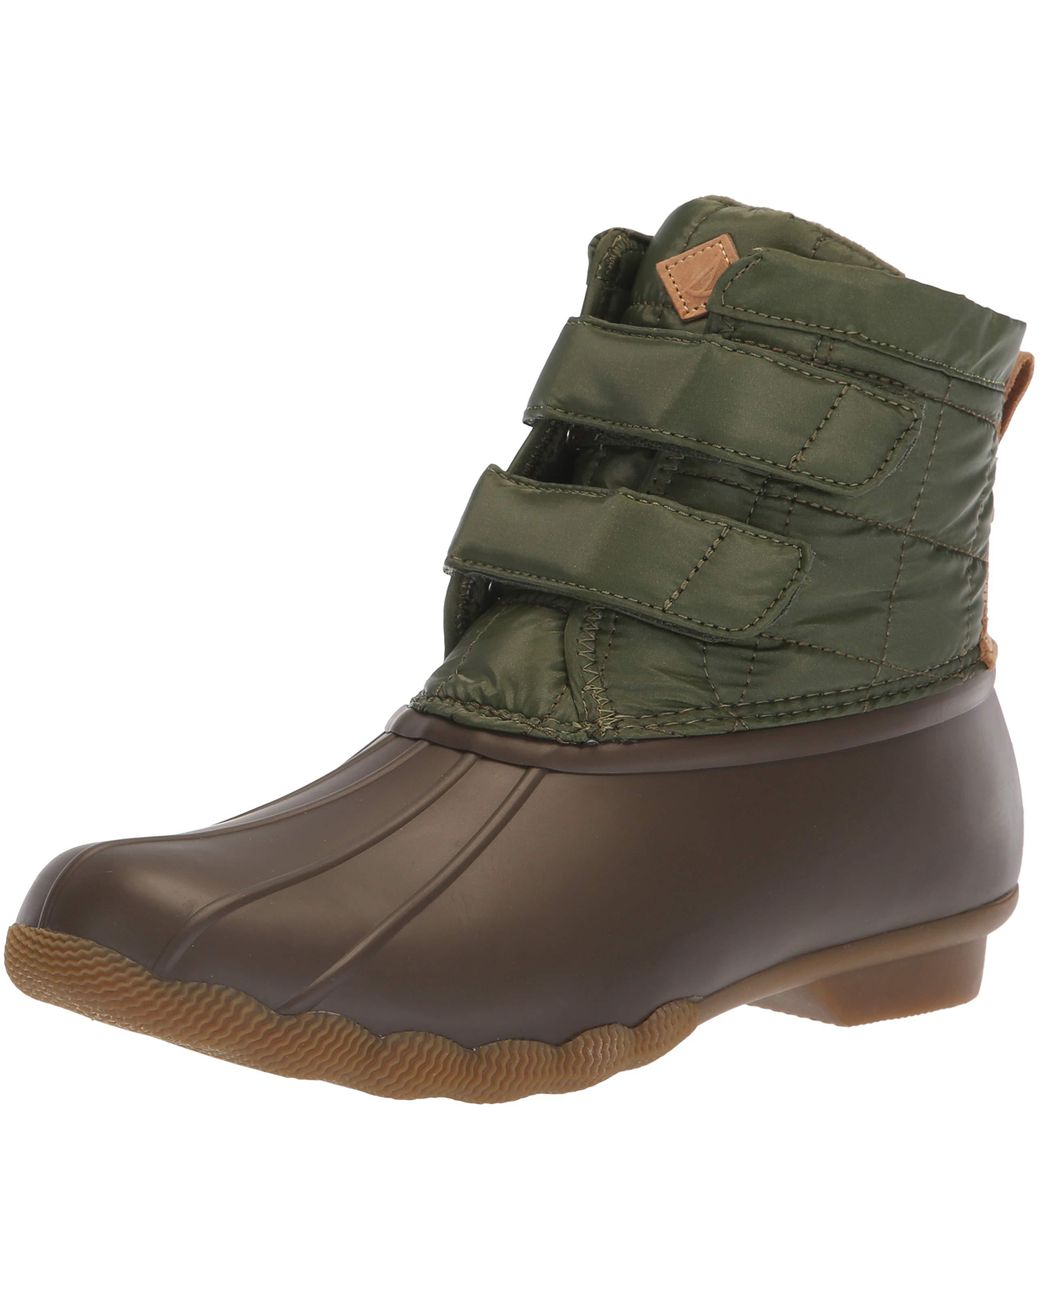 Sperry Saltwater Jetty Snow Boot 